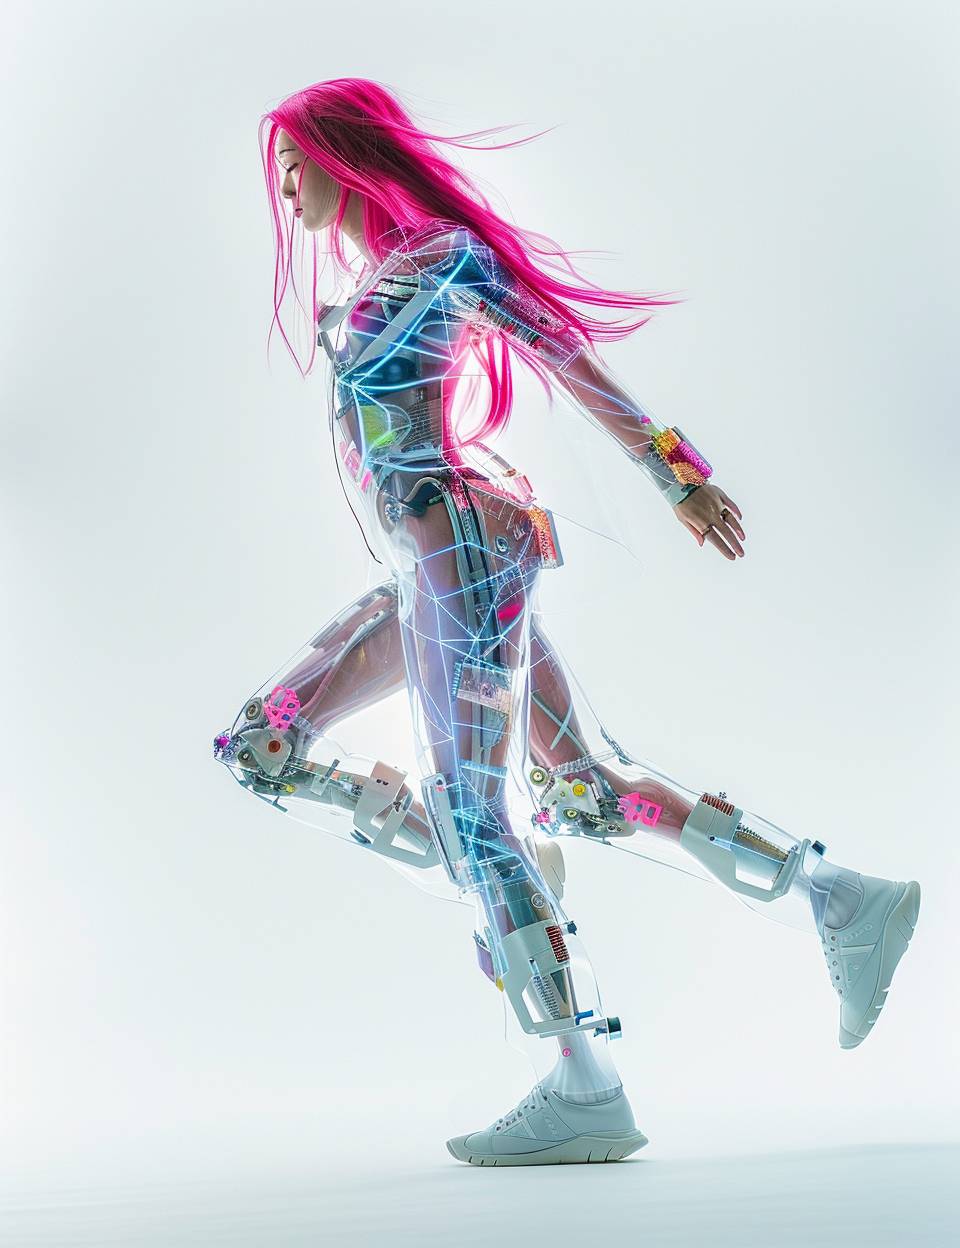 Futuristic Fashionista, Full Body Portrait, Taken with Sony Alpha 1, In a highly detailed photo, a stunning young woman with hot pink hair showcases a translucent tight bodysuit with intricate Retro Futurist Dadaism geometric patterns. The sharpness of the image highlights the intricate details and translucent surfaces of her outfit. Her dynamic pose and the futuristic patterns make her look like a vision from a sci-fi utopia.